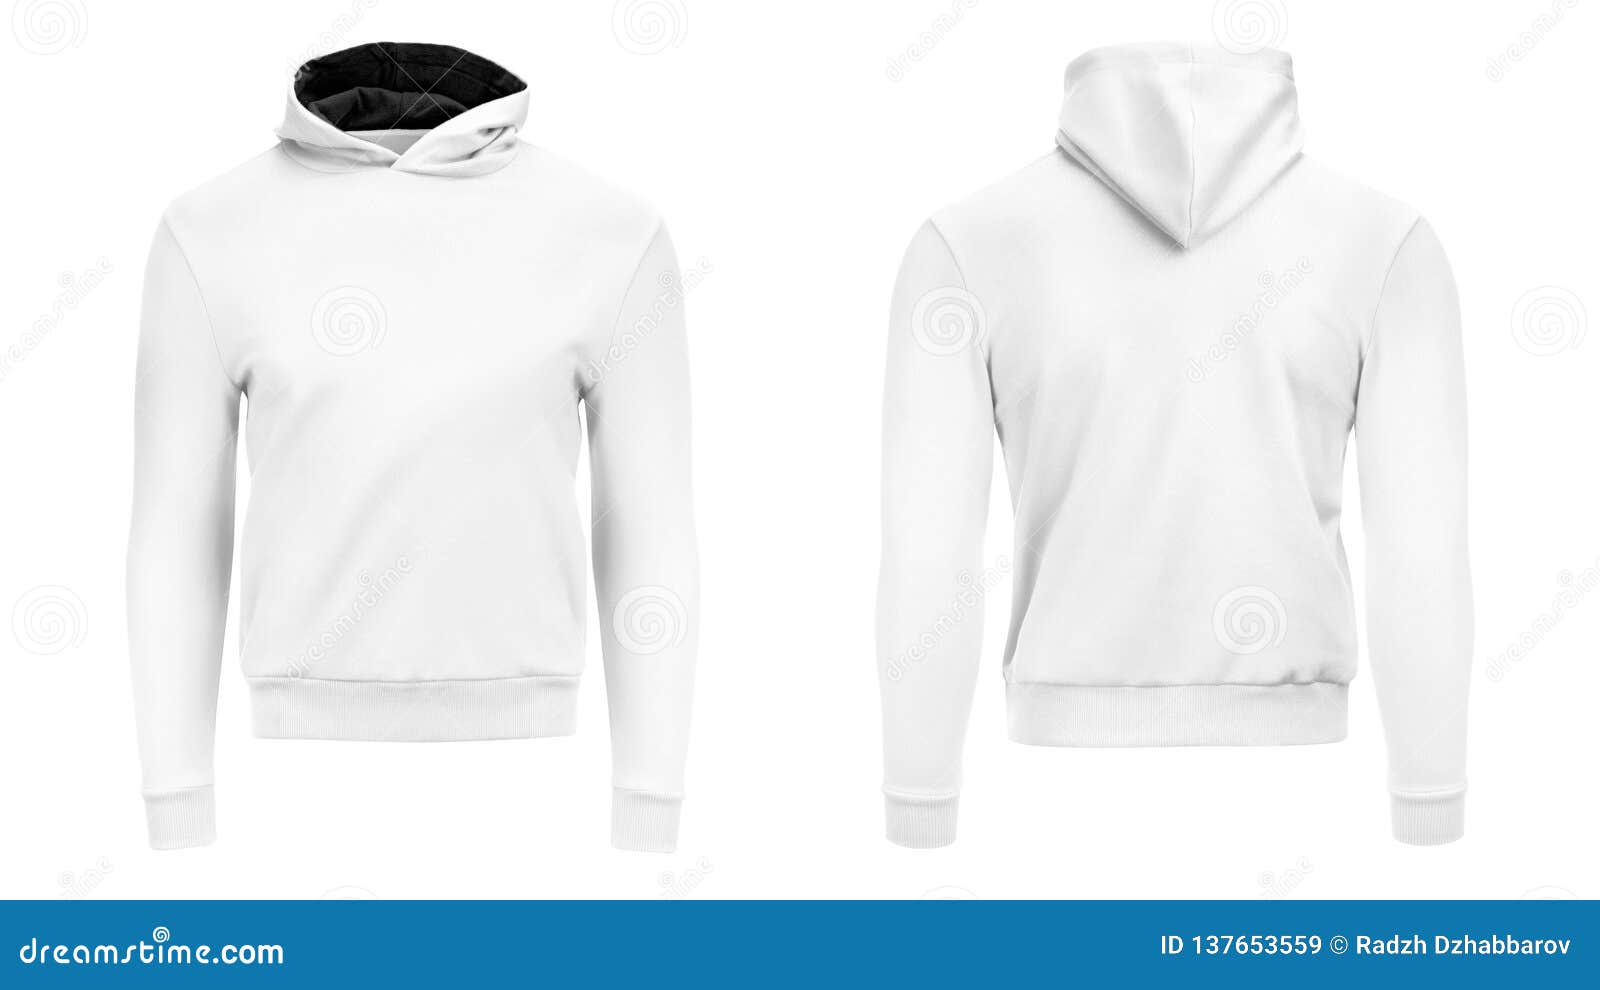 Download White Male Hoodie Sweatshirt Long Sleeve With Clipping ...